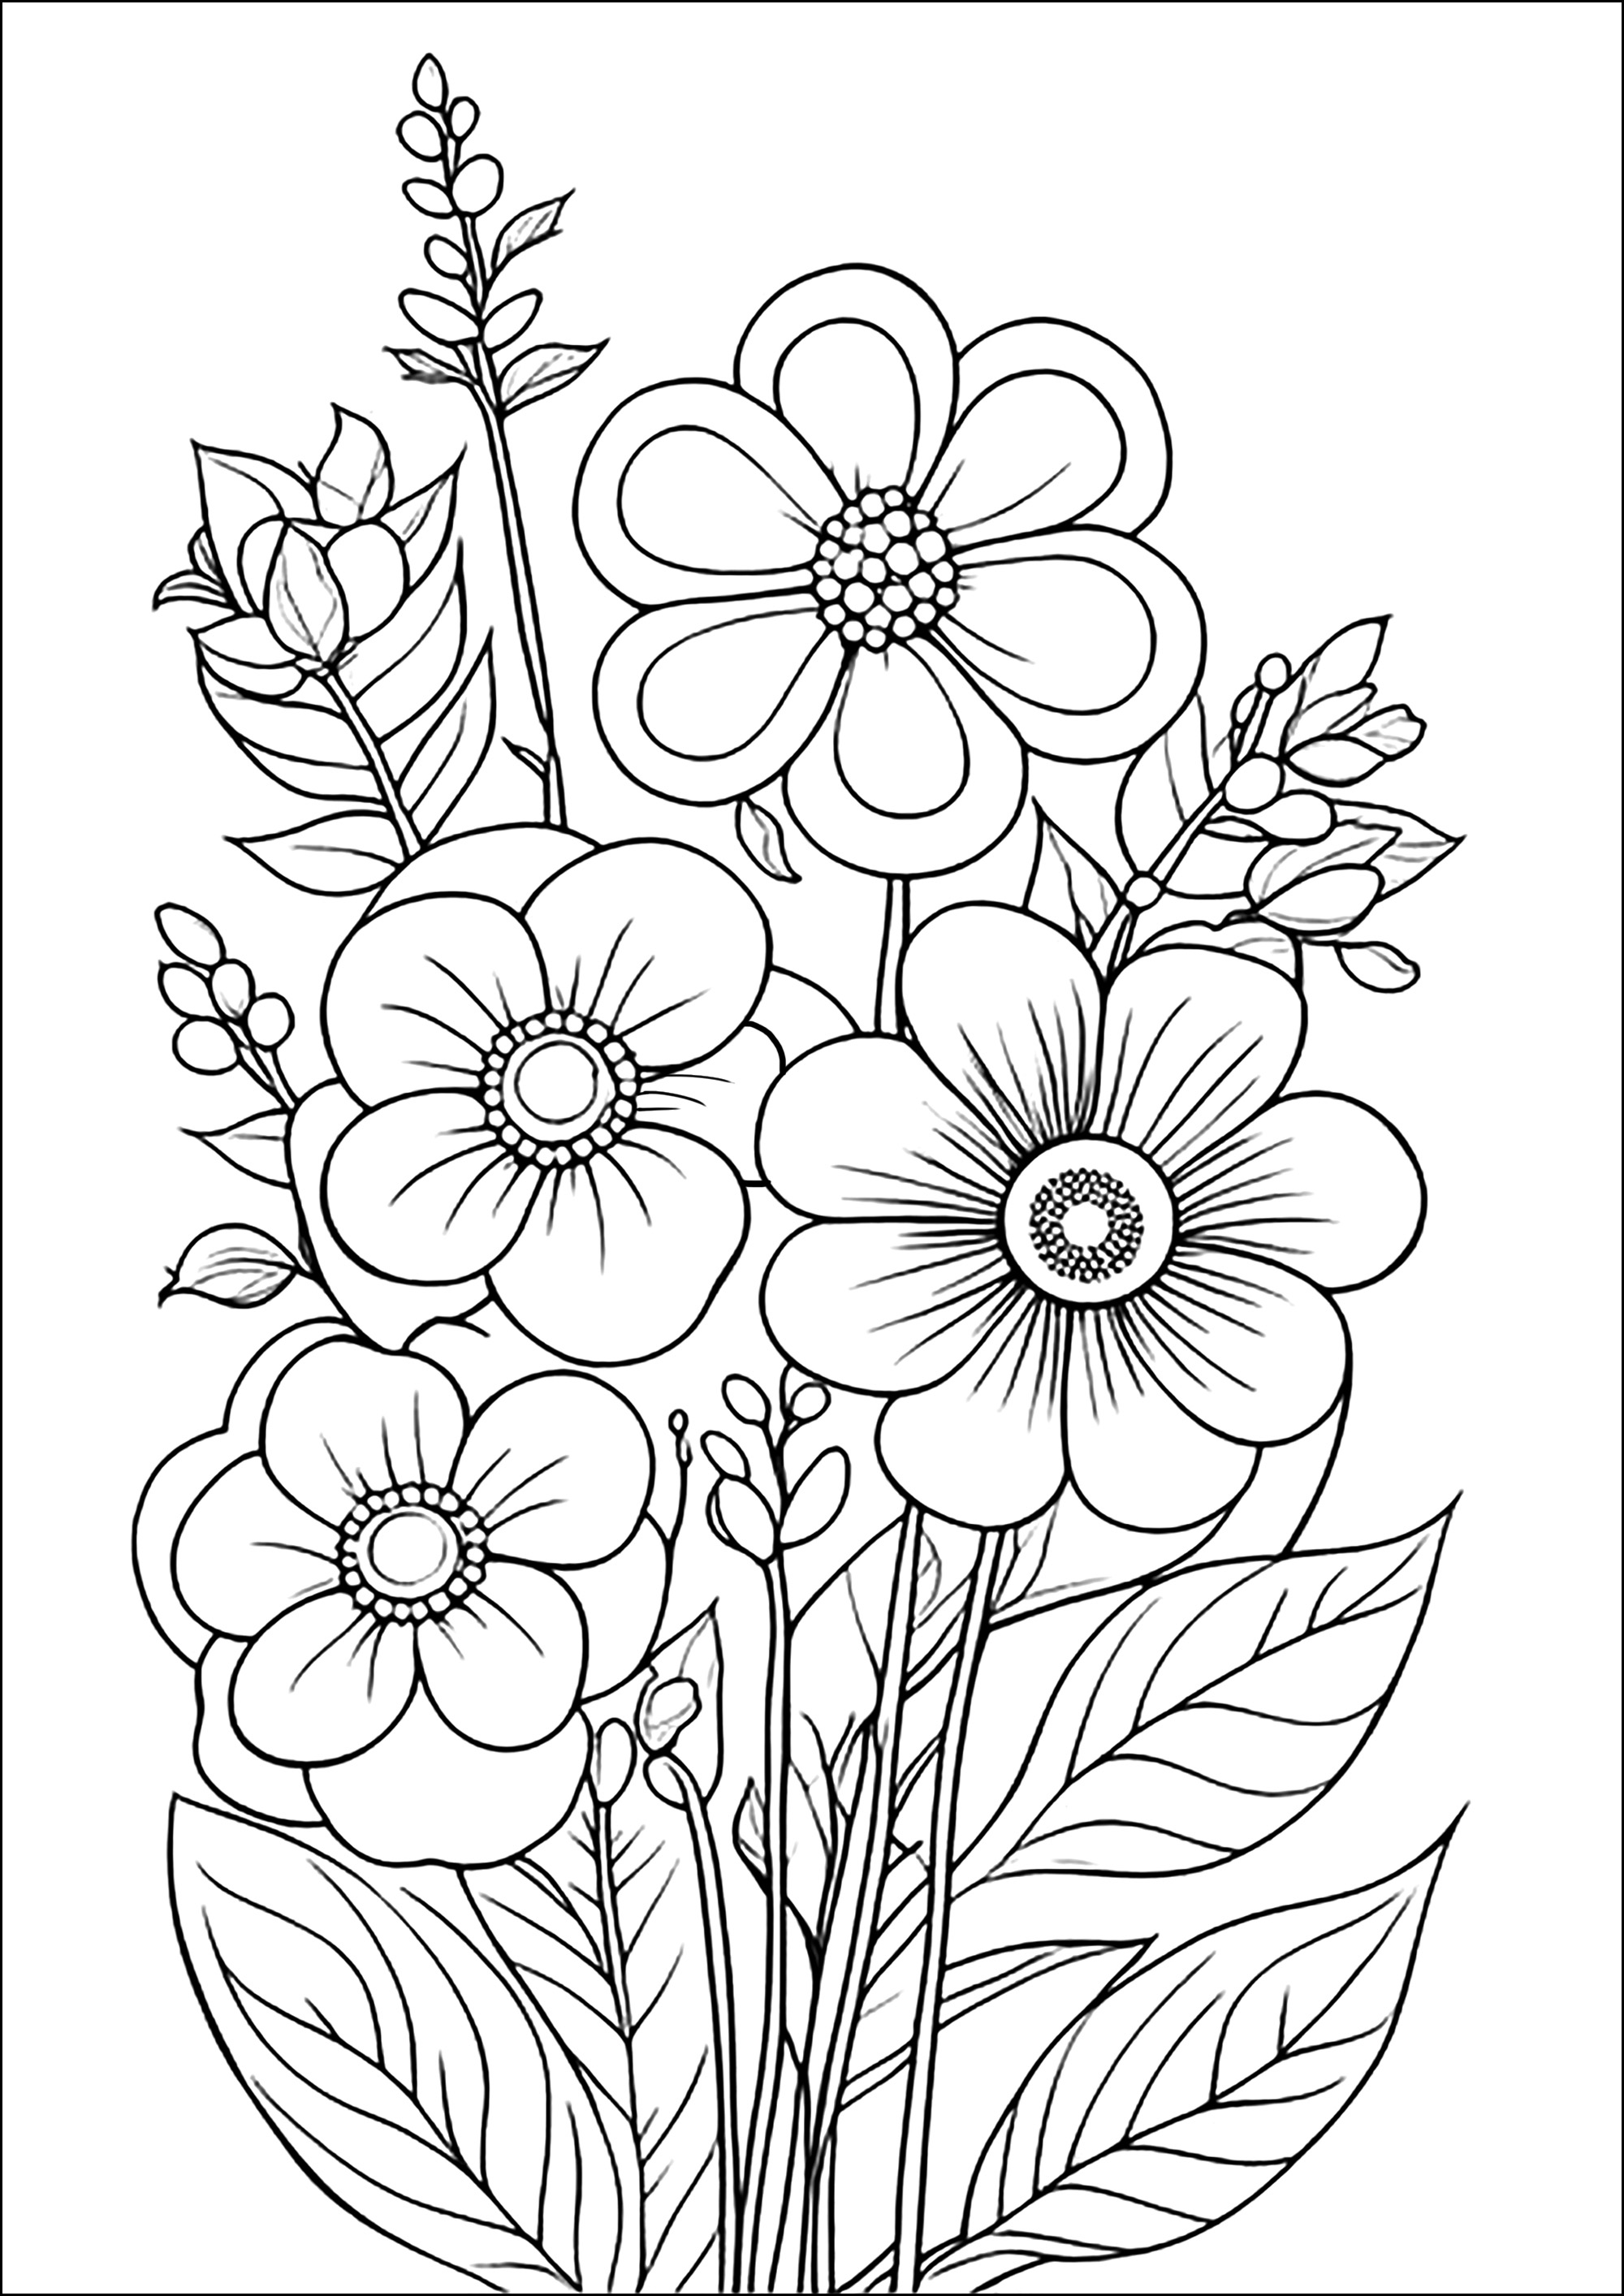 Beautiful flowers to color - Flowers Kids Coloring Pages